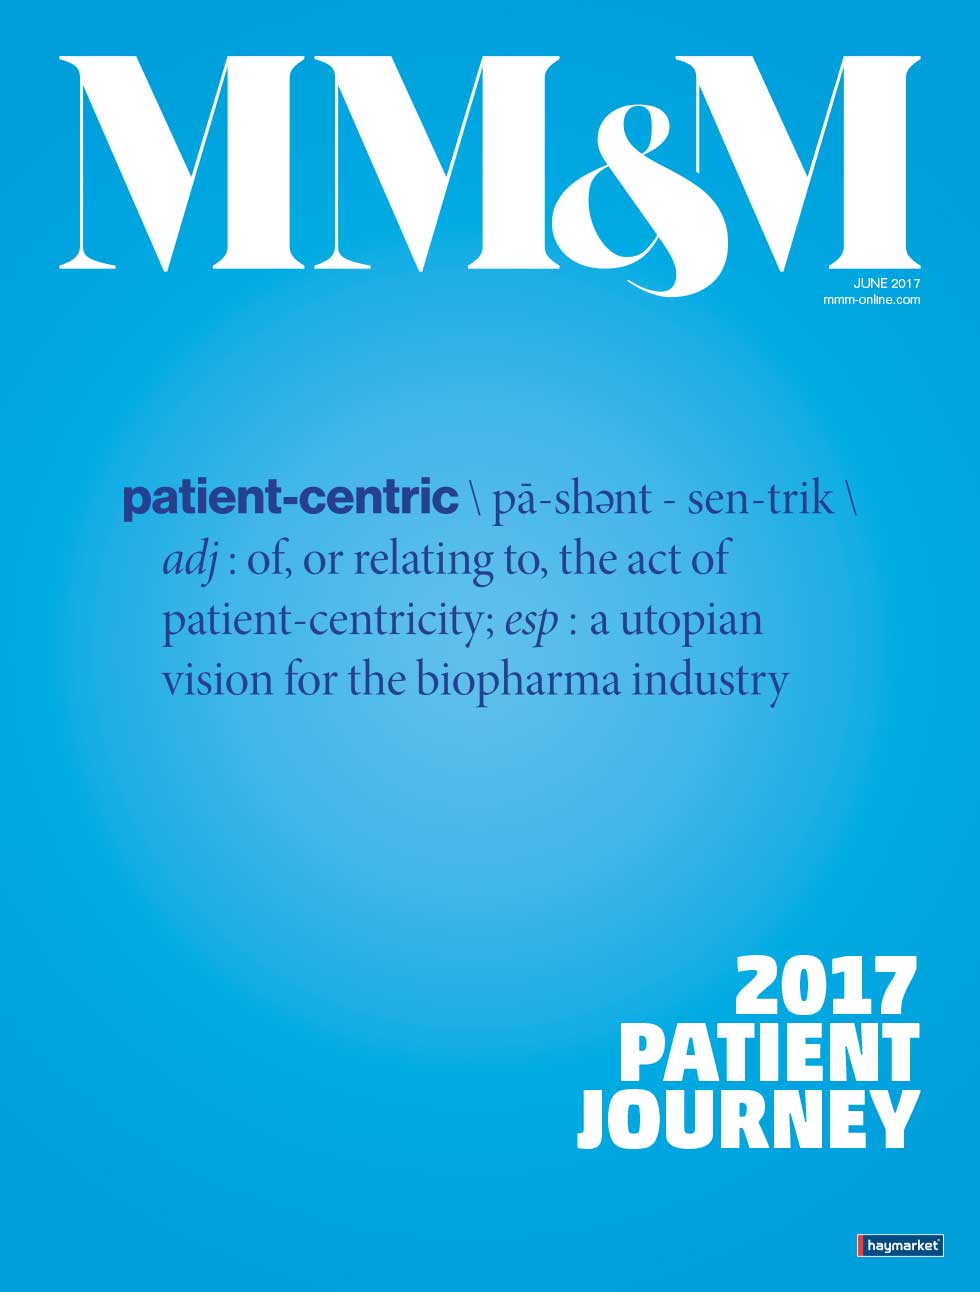 Read the complete Patient Journey 2017 digital edition